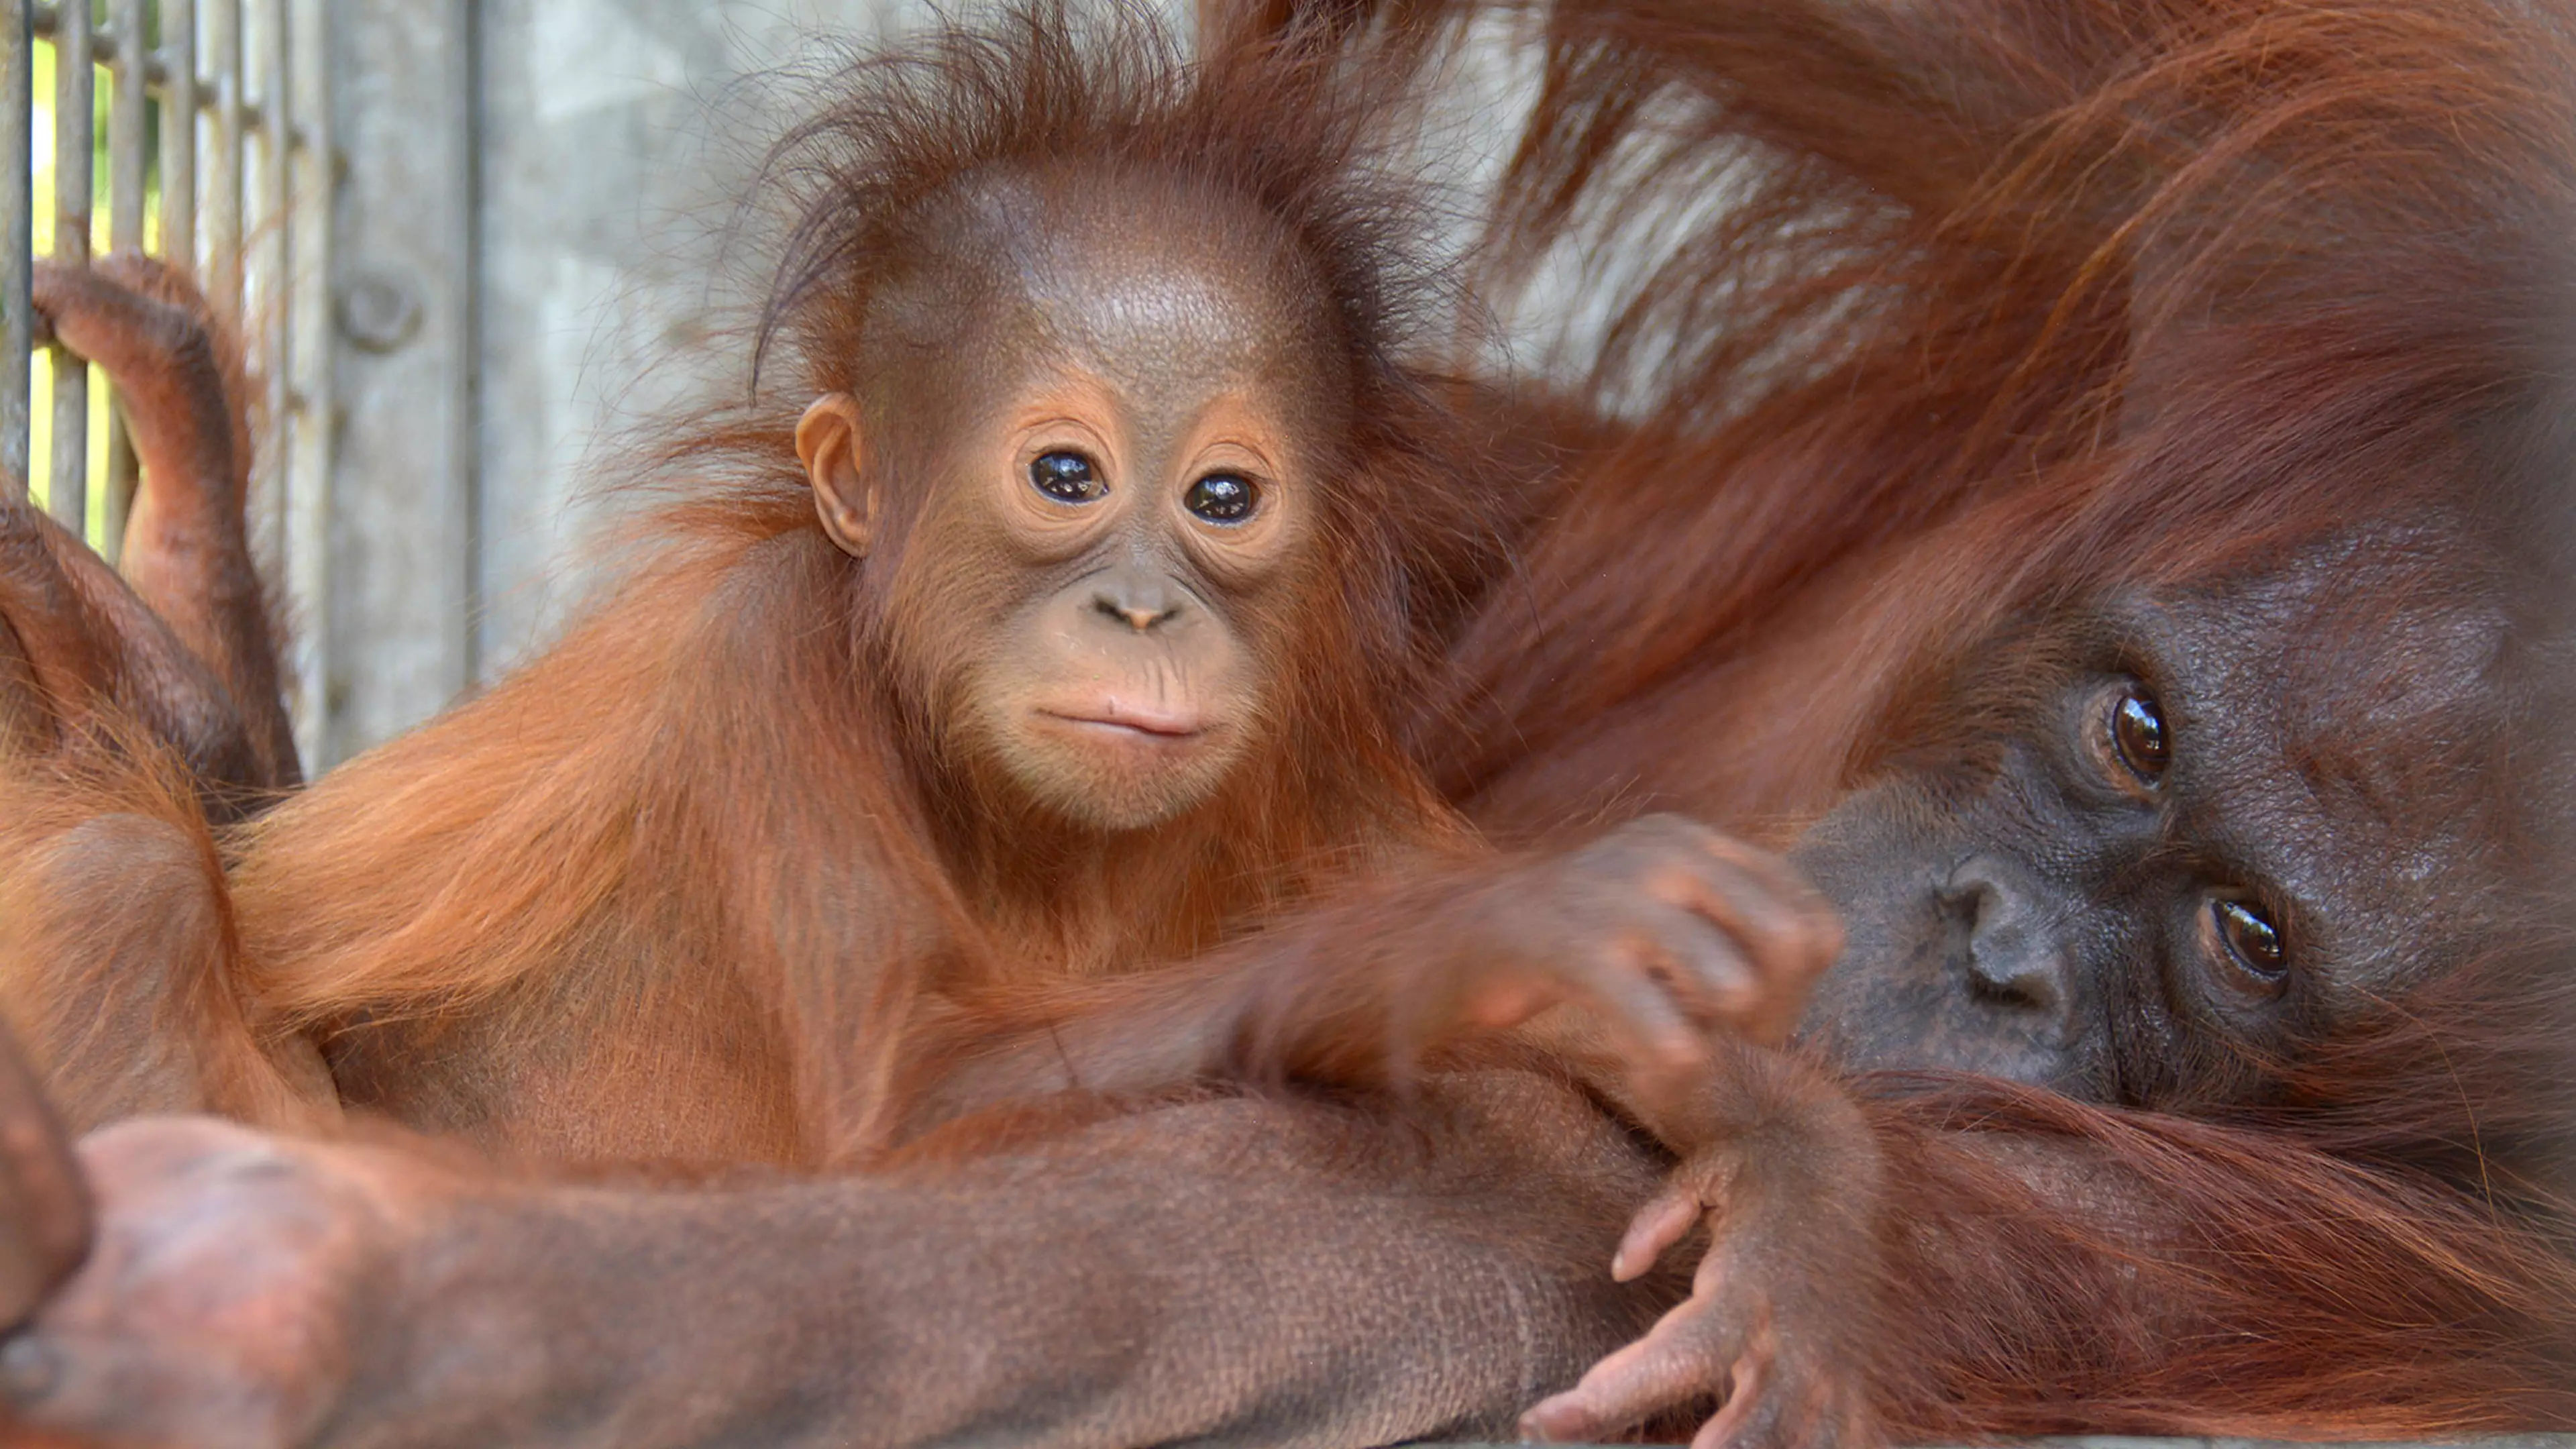 Stolen Baby Orangutan Has An Emotional Reunion With Her Mum And It’s Too Cute